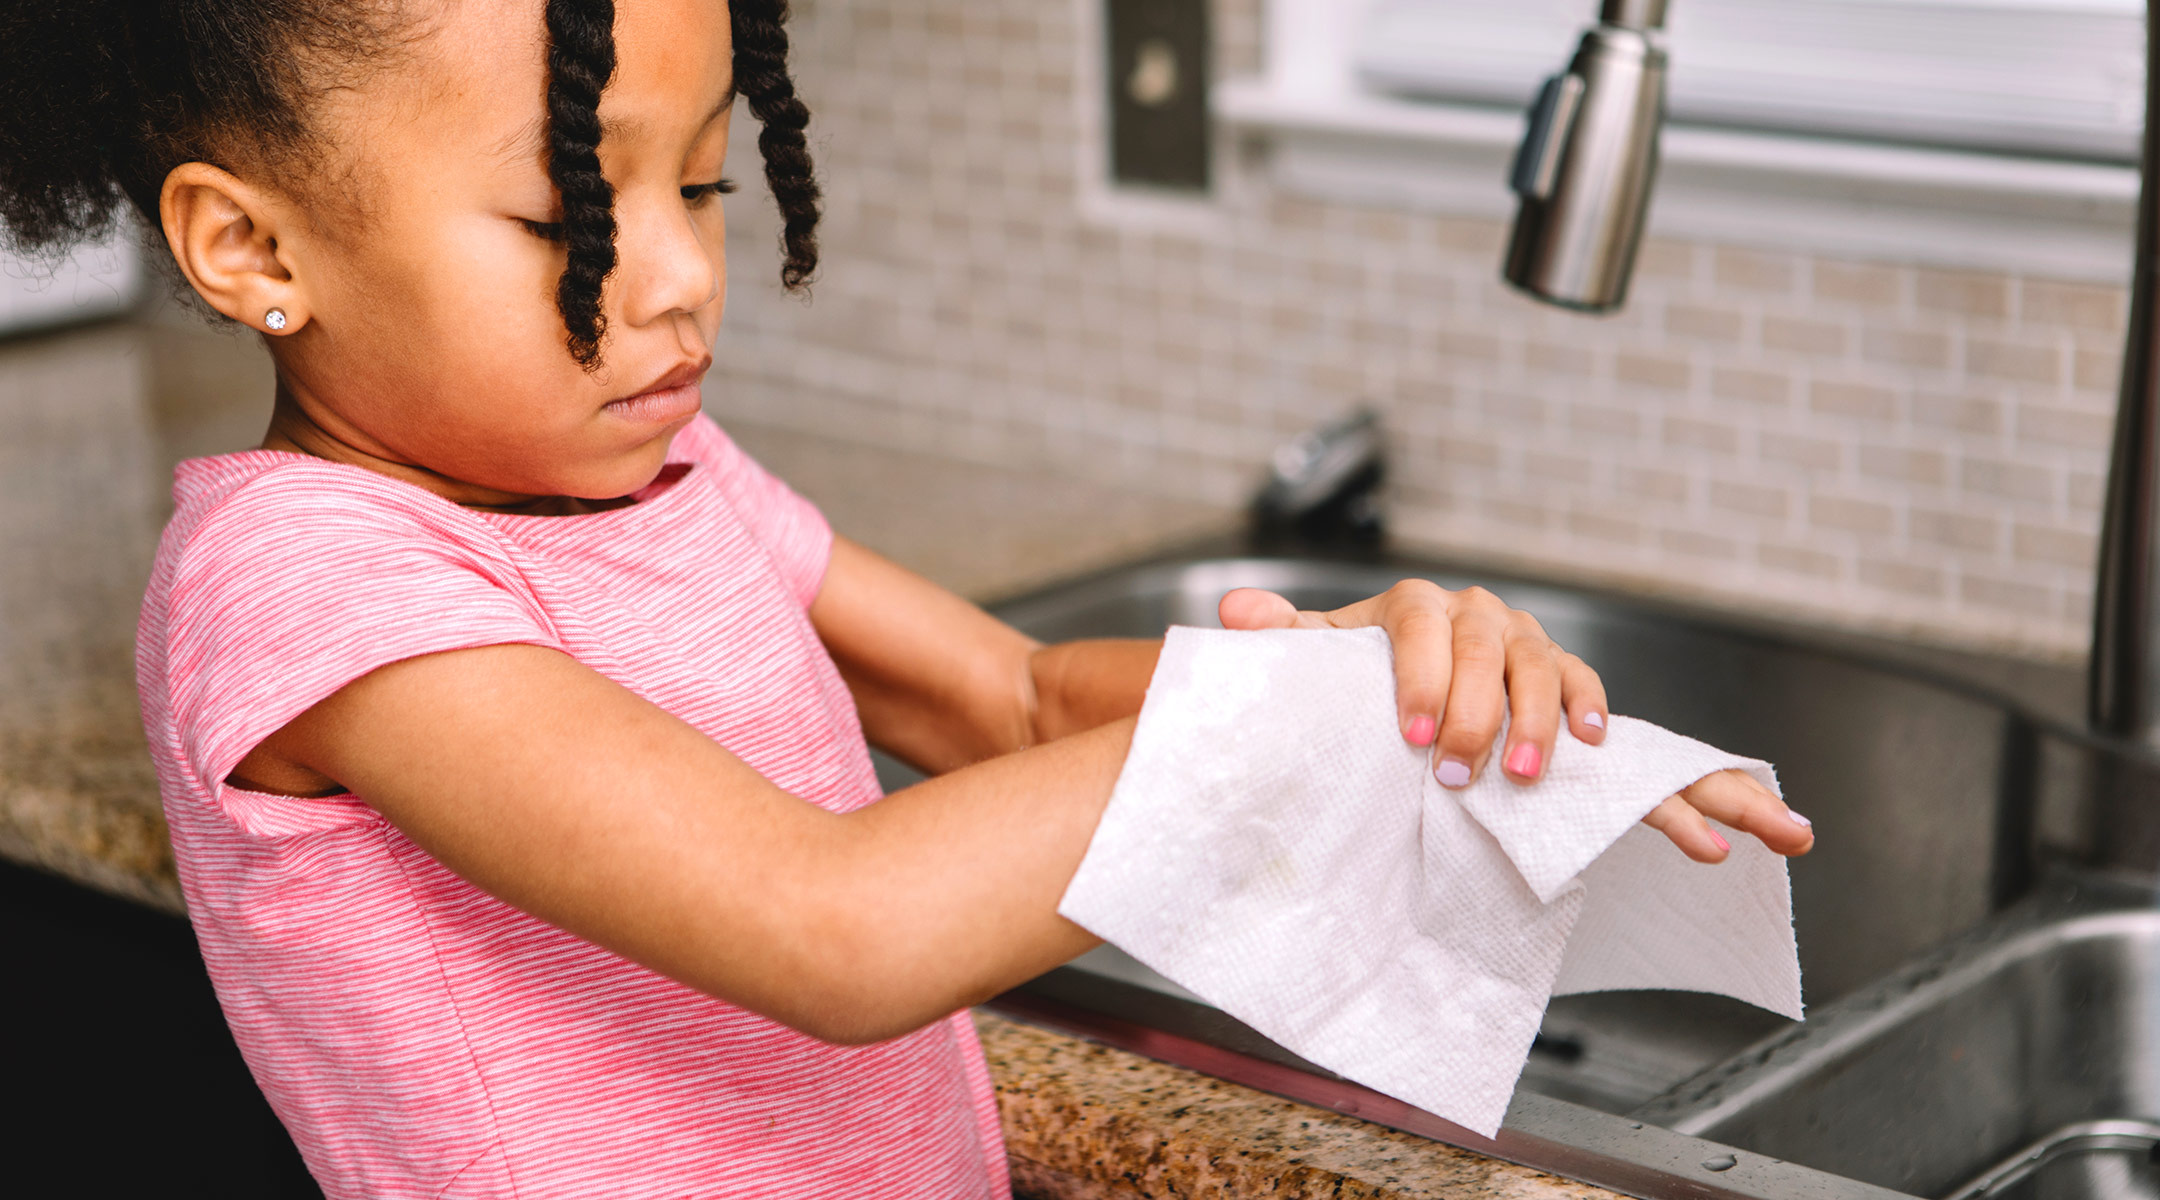 little girl drying her hands after washing them in the kitchen